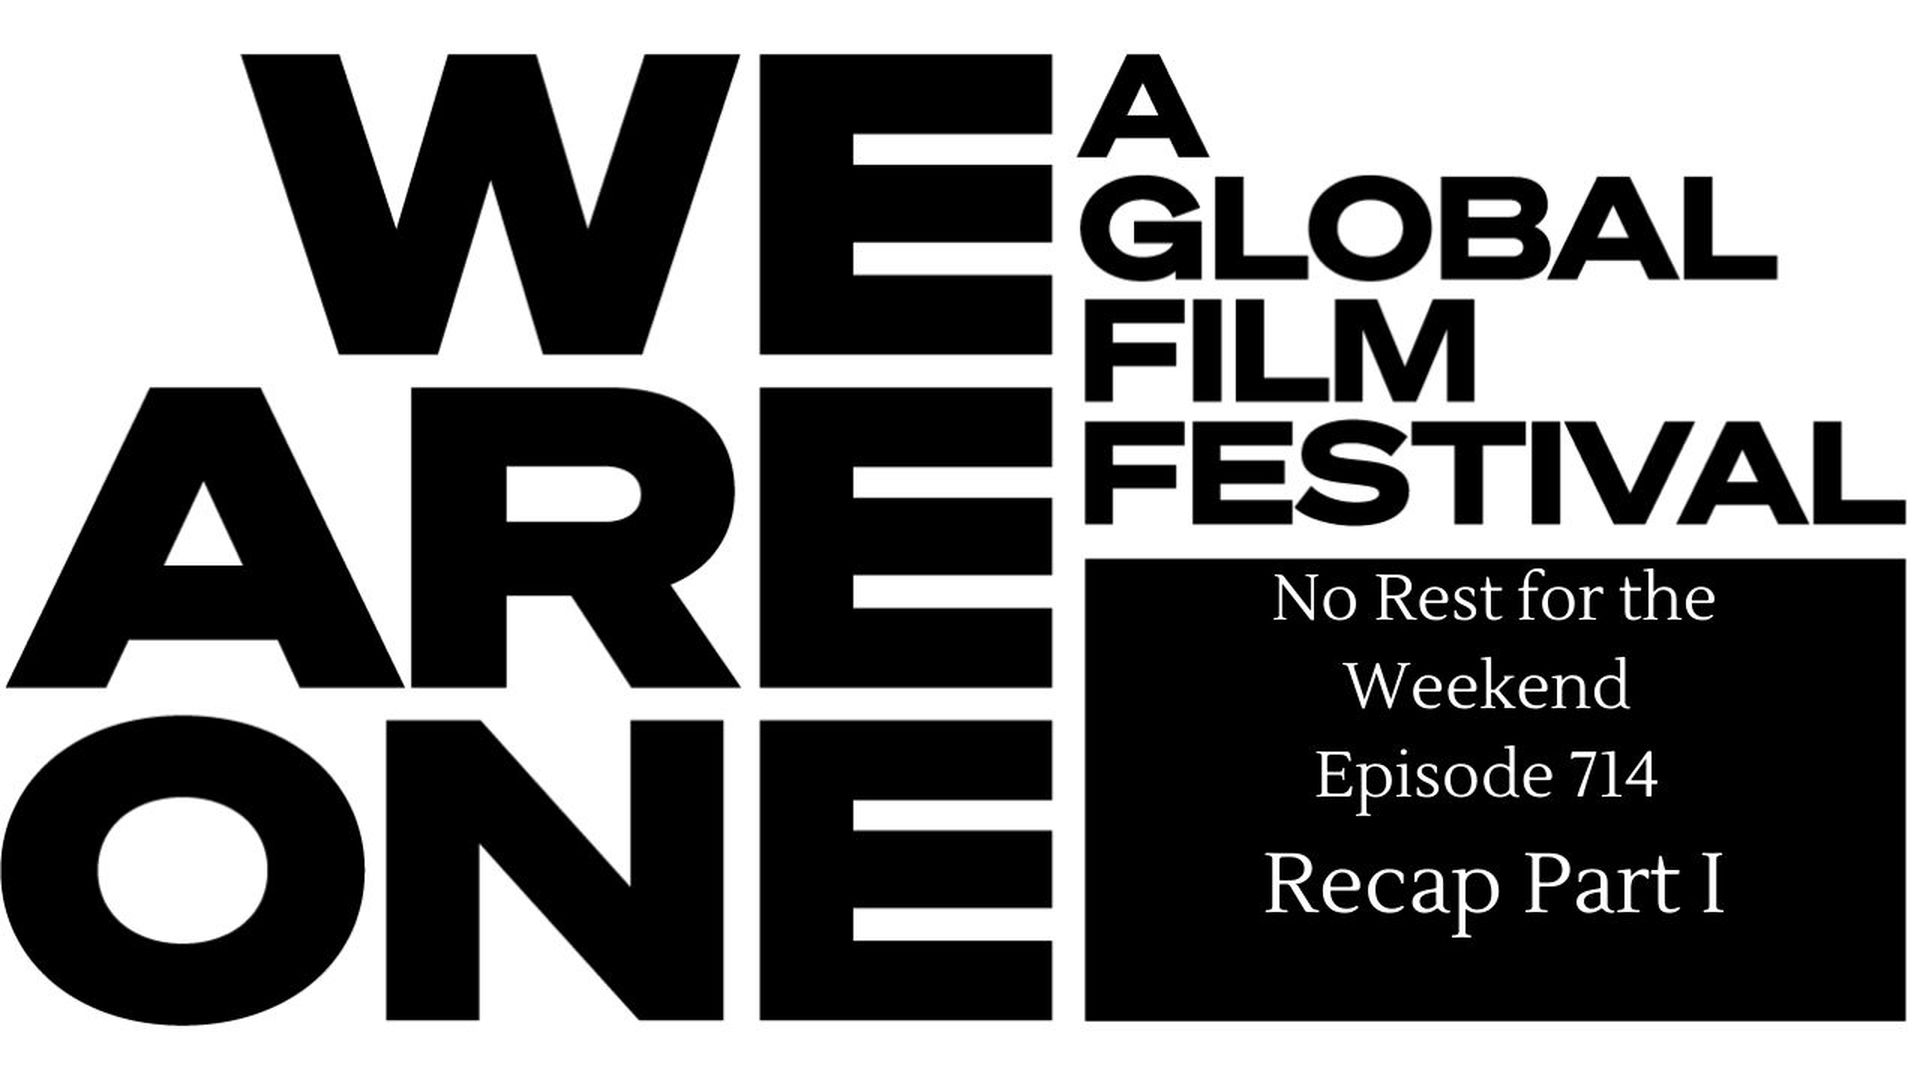 Episode 714: We Are One: A Global Film Festival Recap Part I